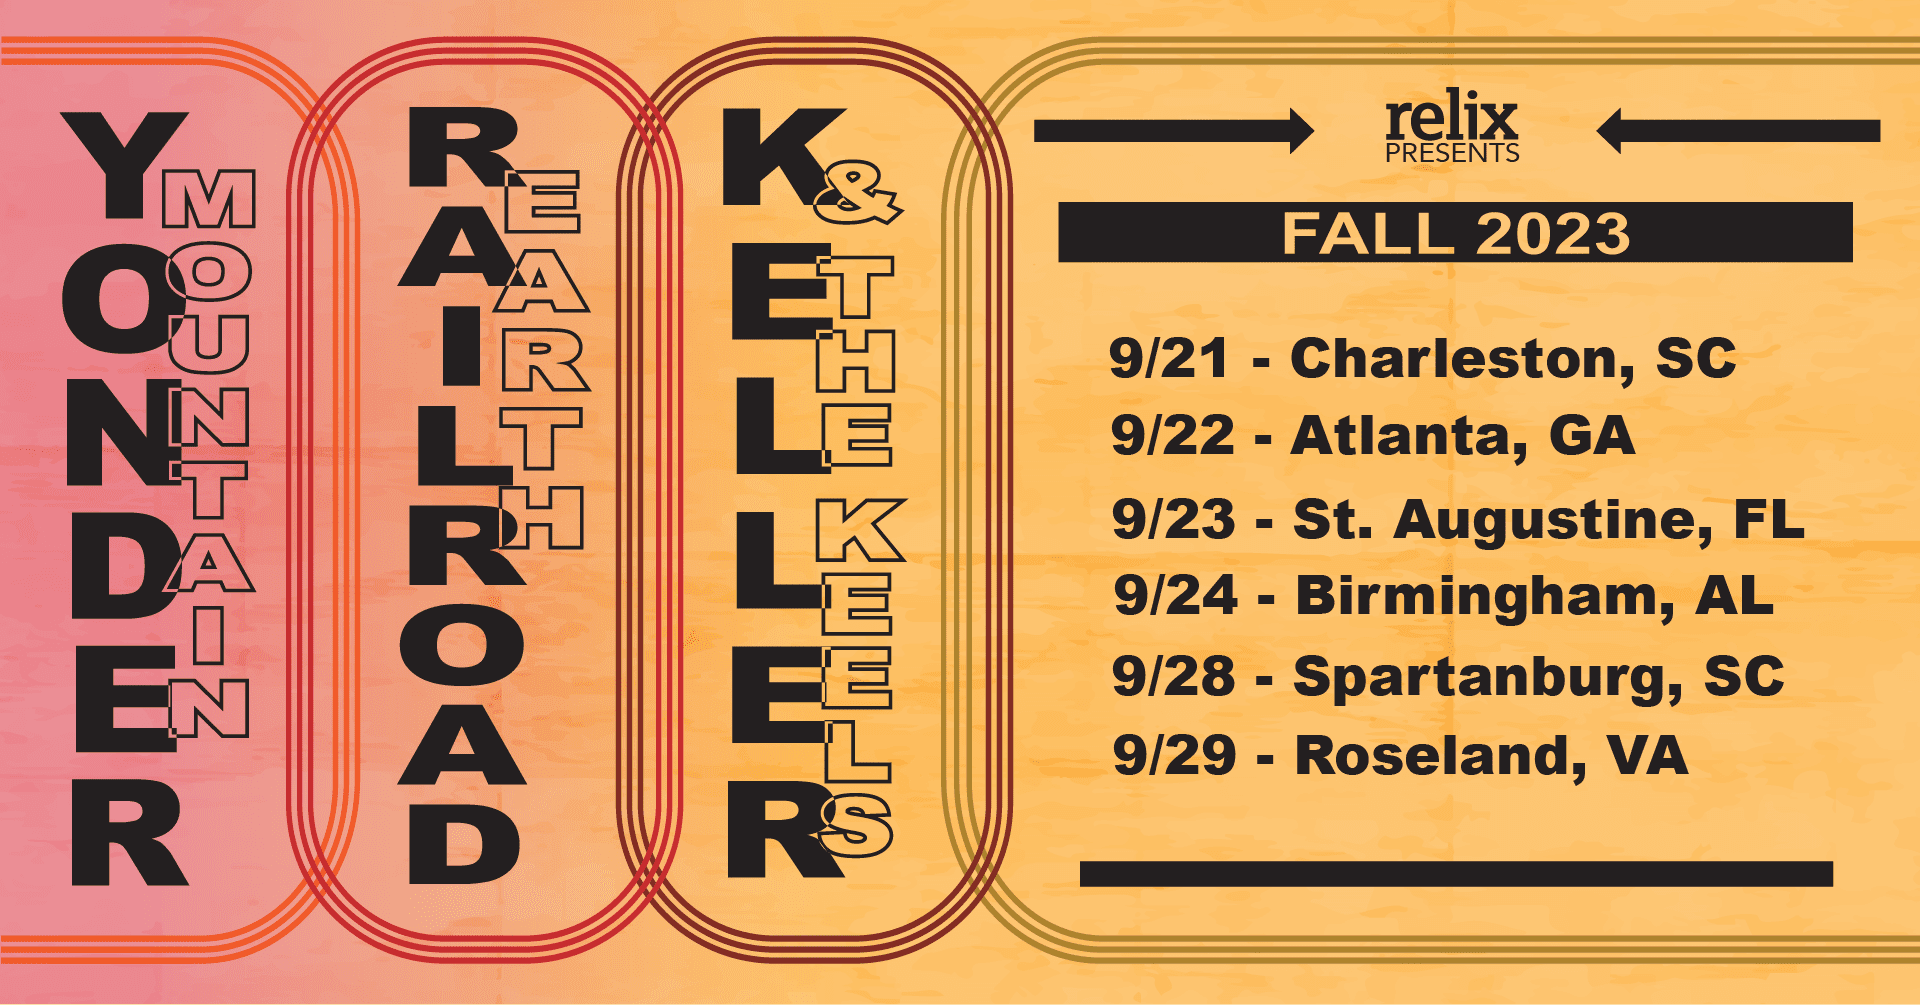 Yonder Mountain String Band, Railroad Earth and Keller & The Keels to Join Forces on Fall 2023 Tour